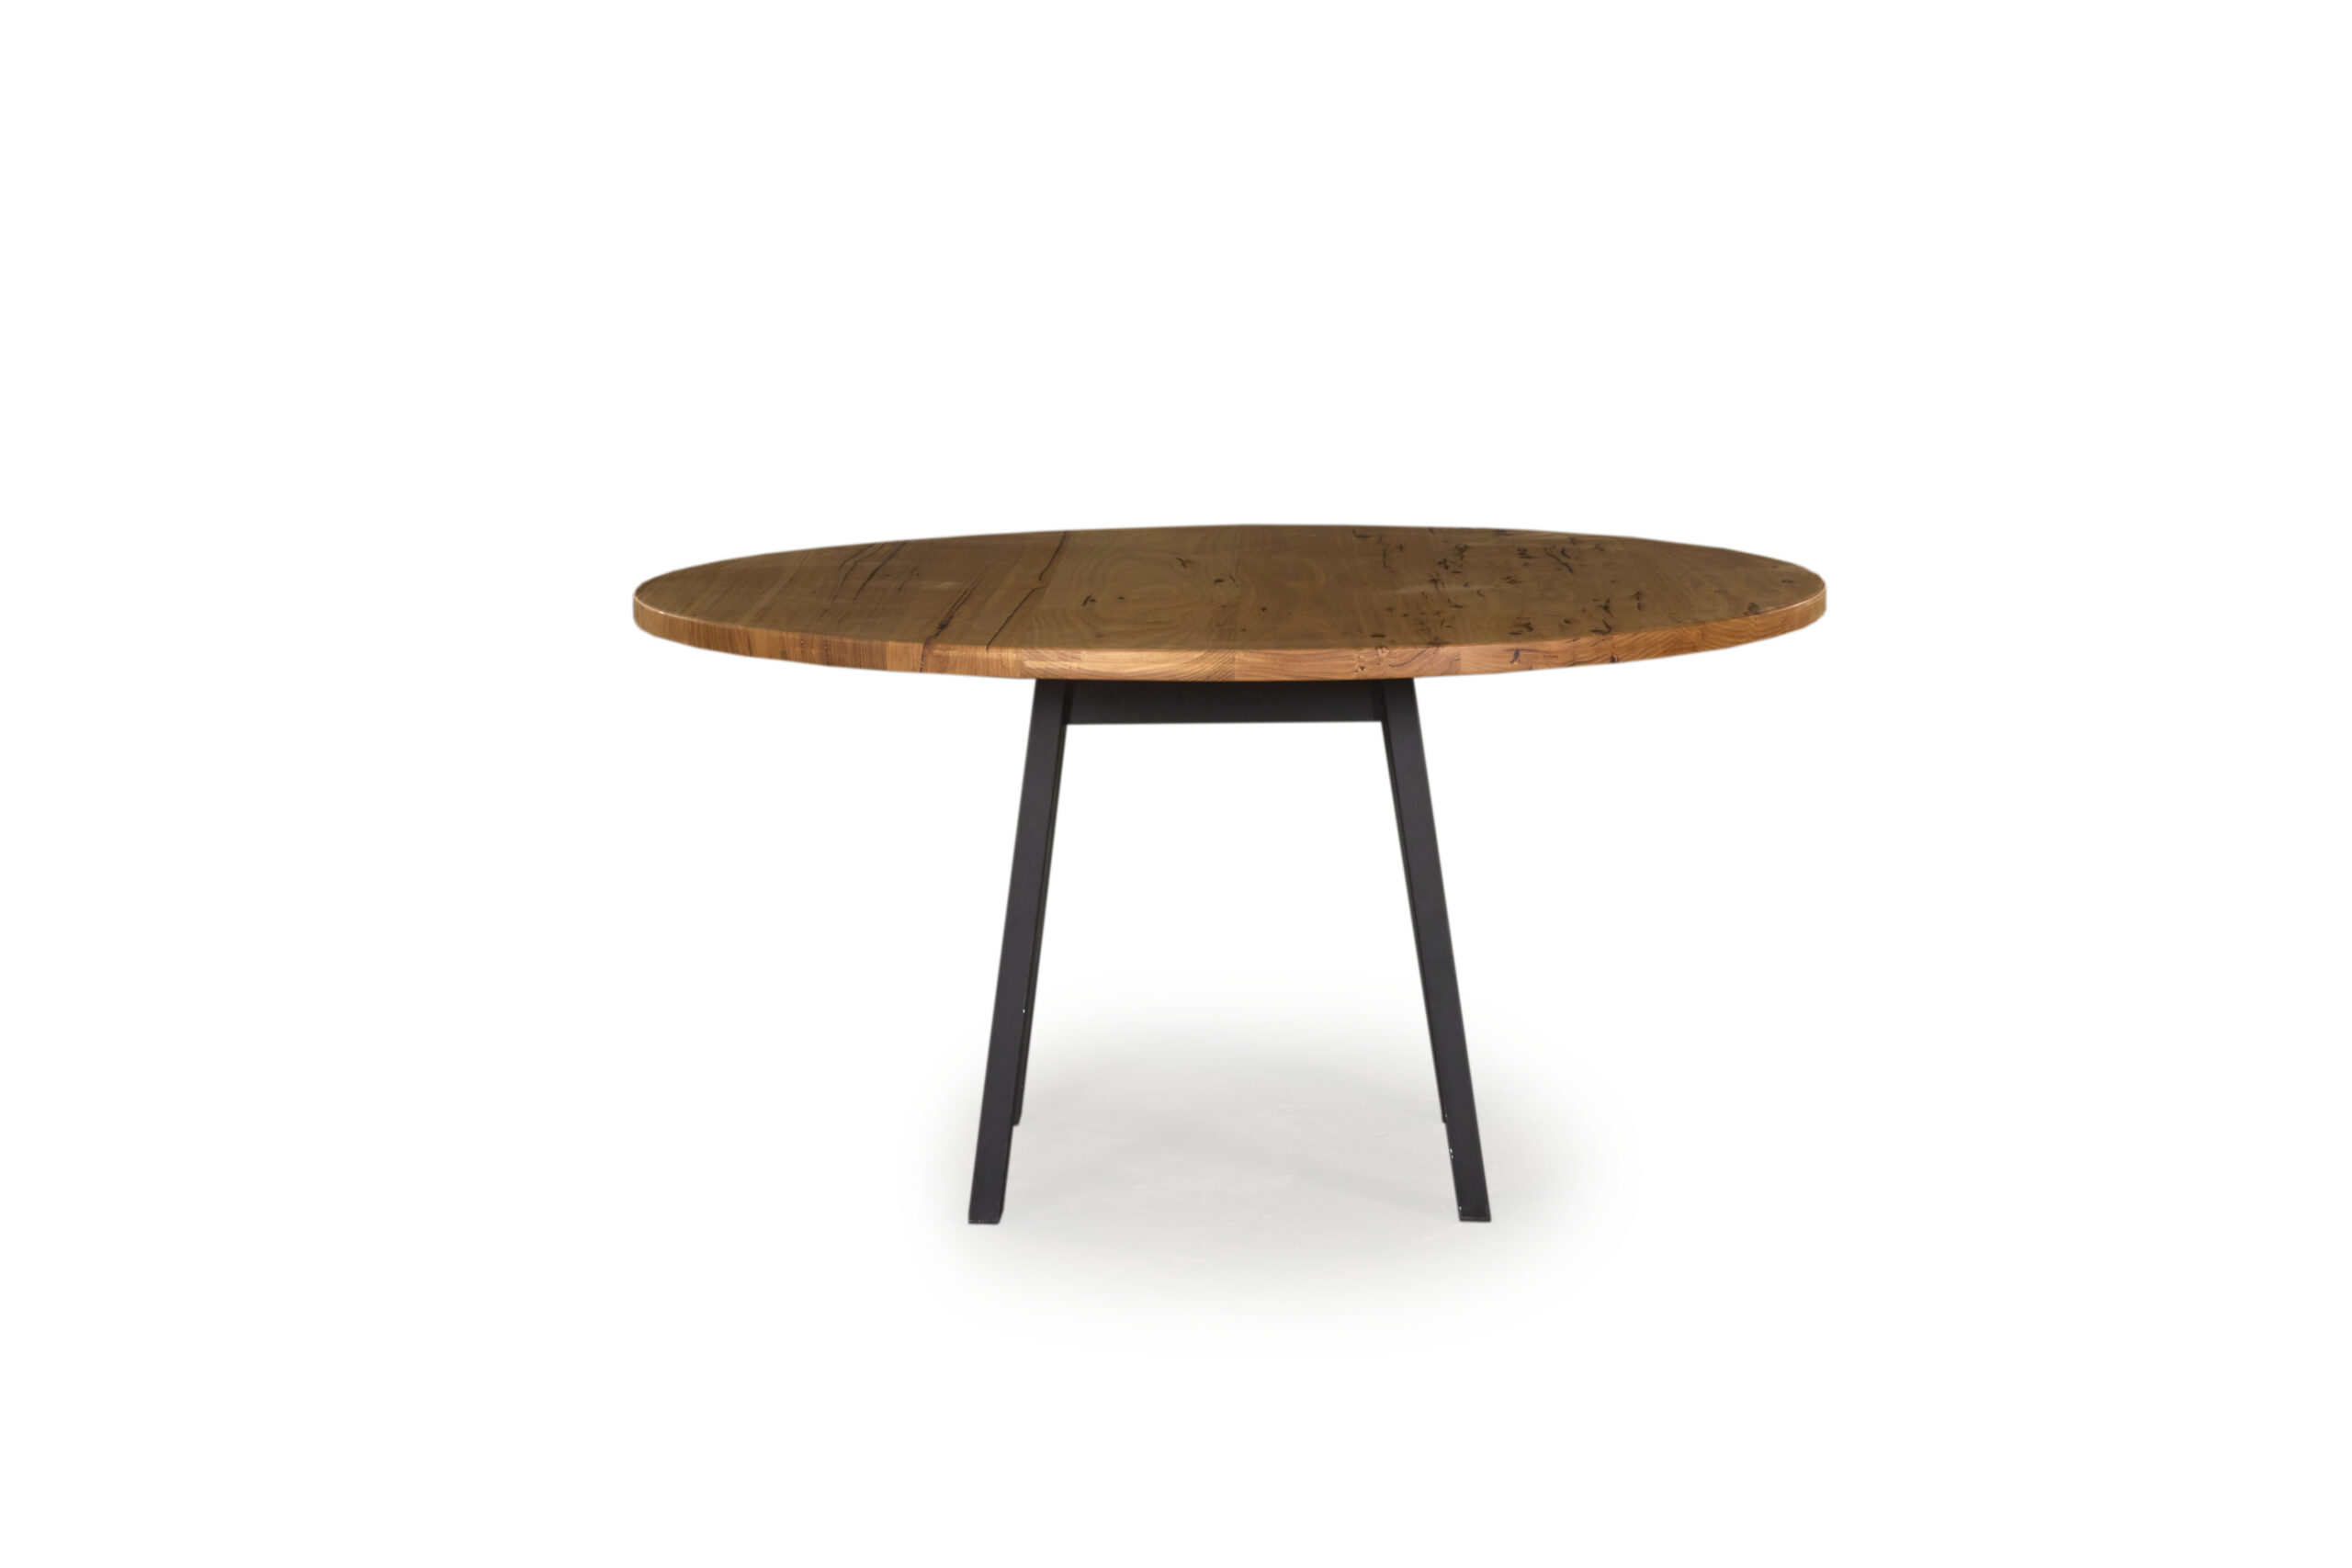 Kooyong Round Dining Table - A stylish and versatile centerpiece by Arranmore Furniture, featuring a round tabletop and sturdy base. Perfect for modern dining spaces seeking timeless elegance.